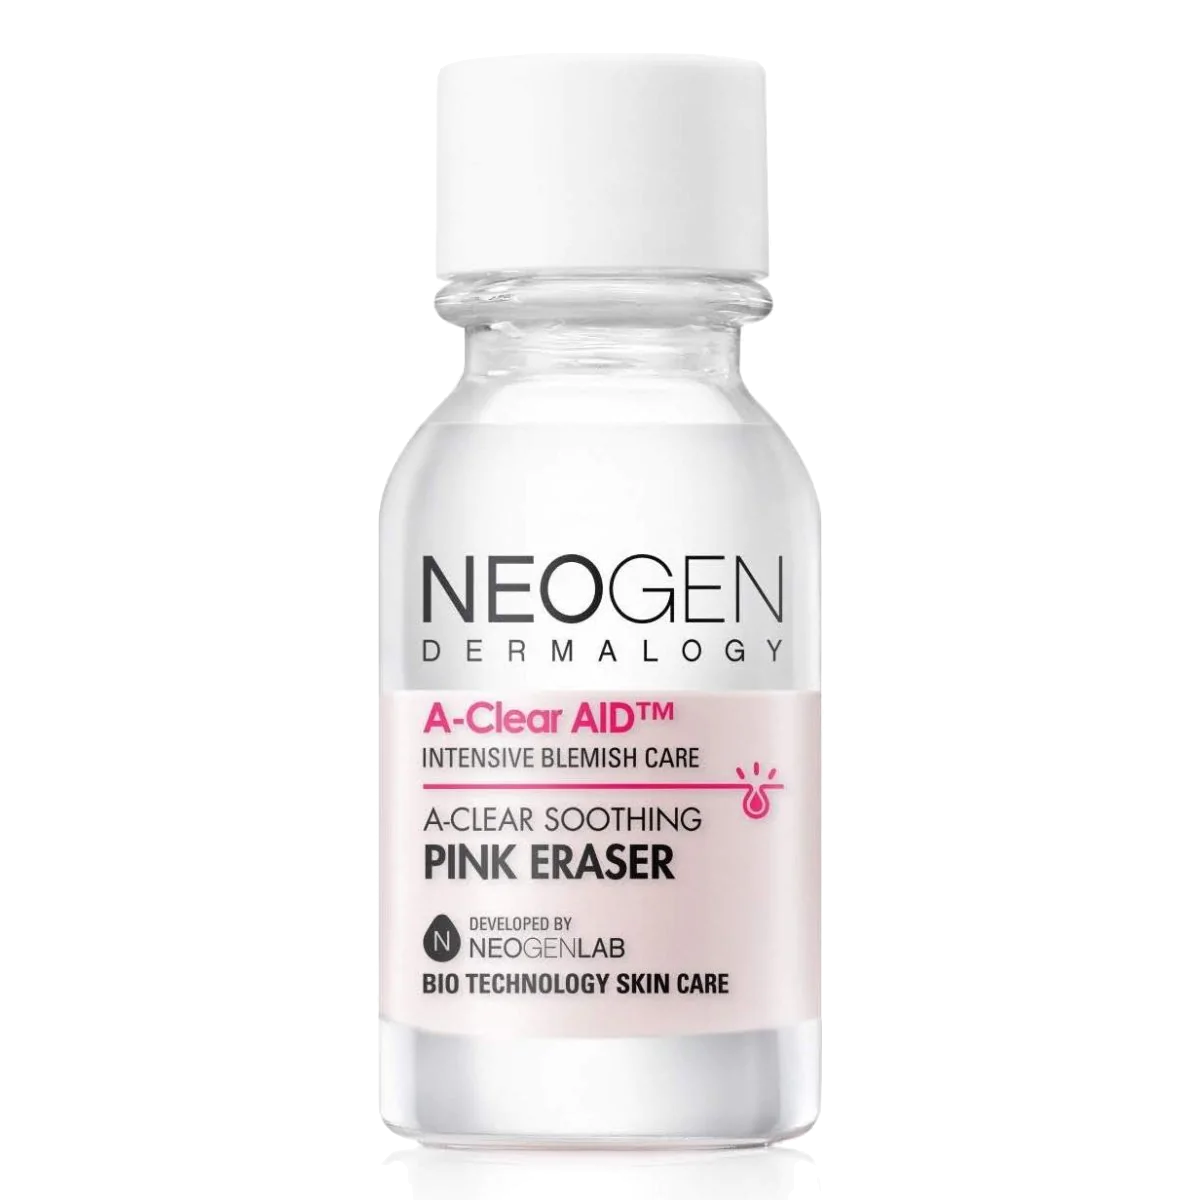 buy-neogen-a-clear-soothing-pink-eraser-15ml-at-lila-beauty-korean-and-japanese-beauty-skin-care-828080copy.png